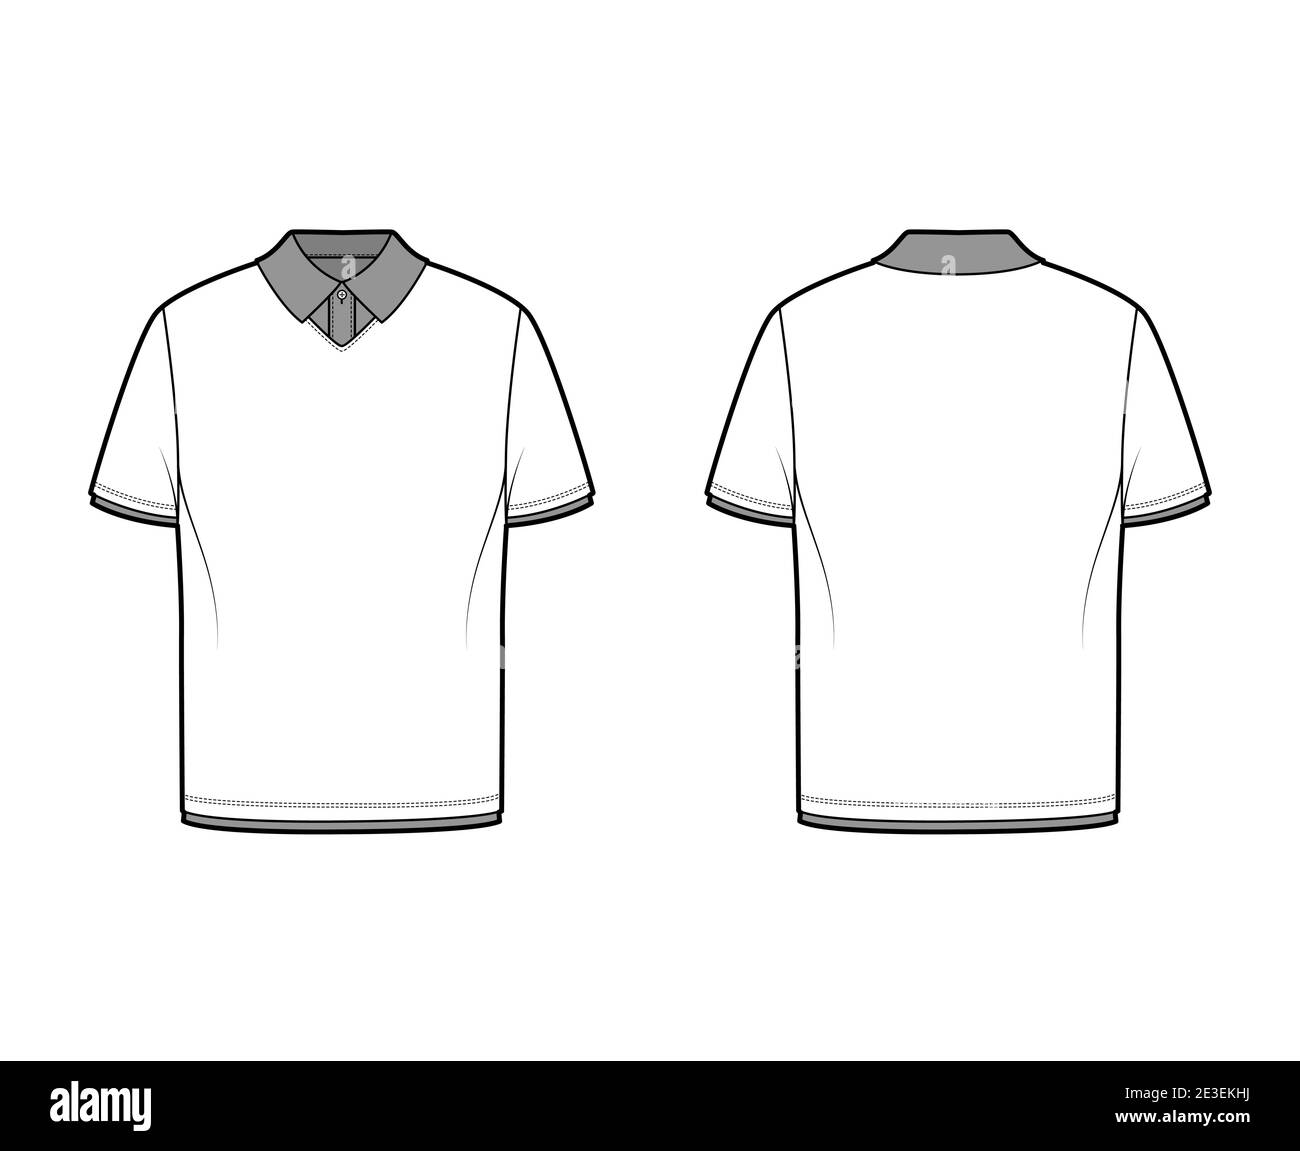 Double t-shirt technical fashion illustration with short sleeves, tunic length, henley neck, oversized, flat knit collar. Apparel top outwear template front, back, white color. Women men CAD mockup Stock Vector